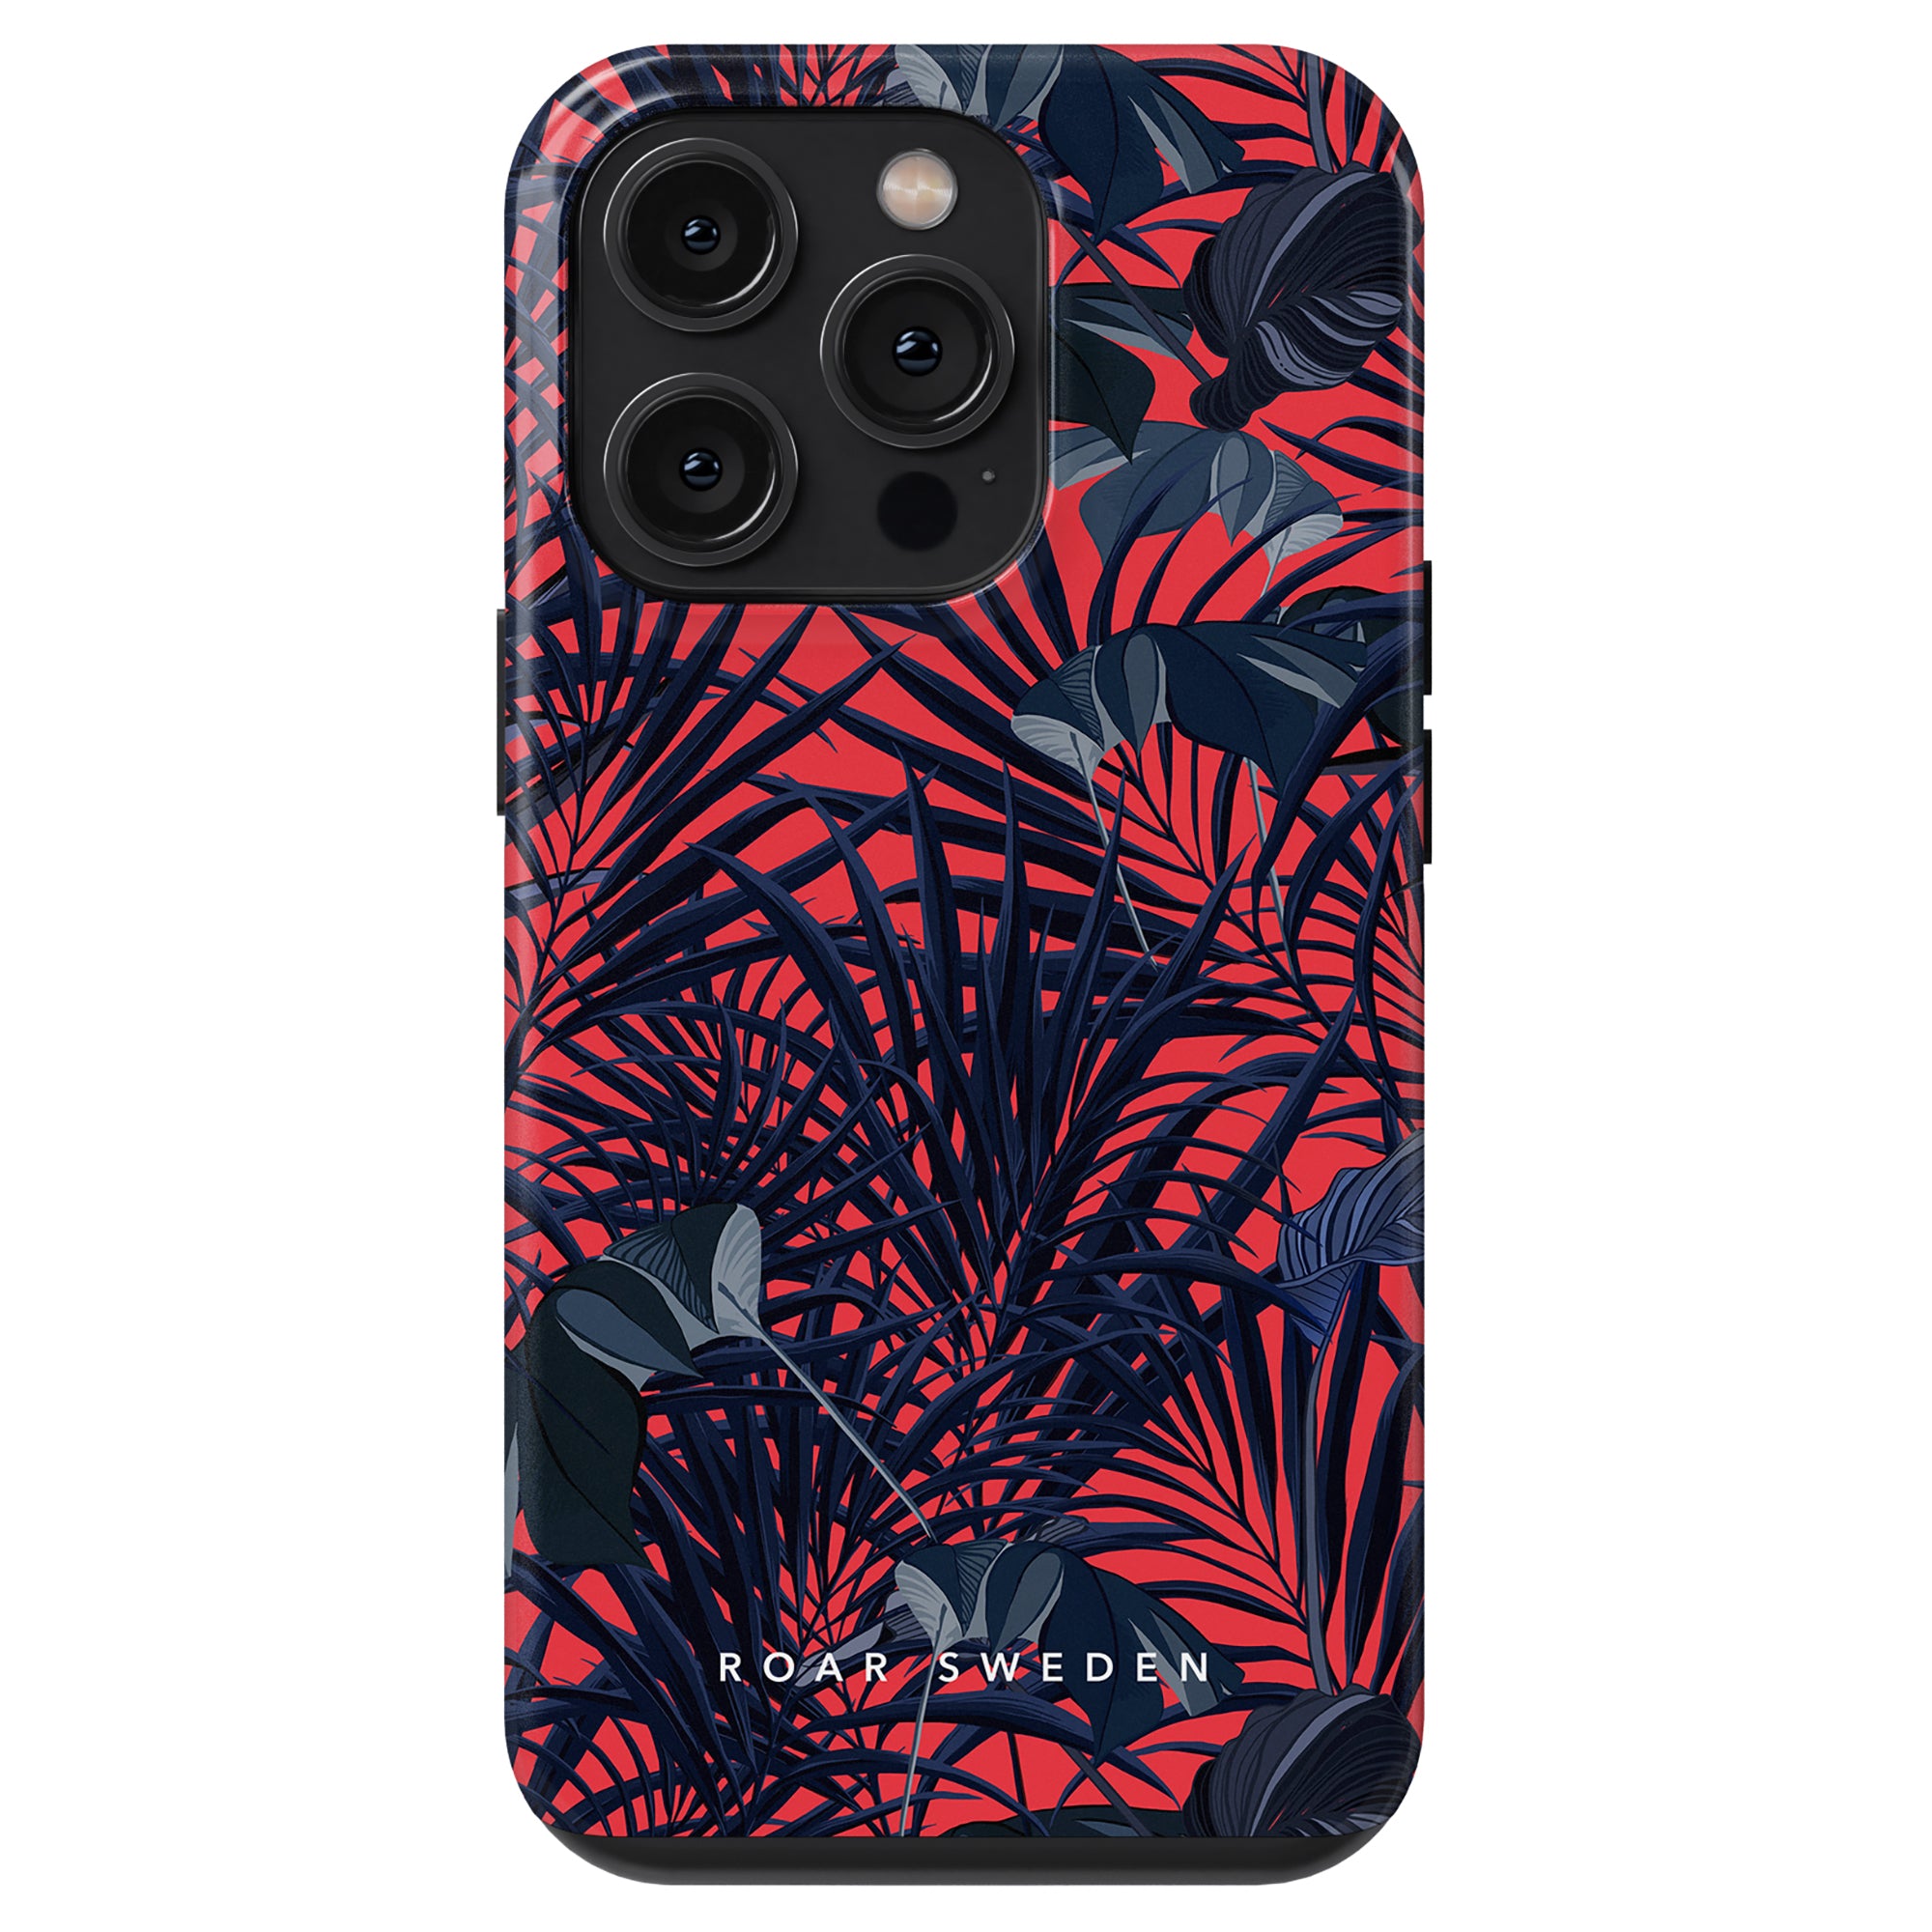 A smartphone with a Red Tropics - Tough Case from the Jungle Collection, showcasing a stunning red and black tropical leaf pattern and triple rear cameras. The mobilskal reads "ROAR SWEDEN" at the bottom.